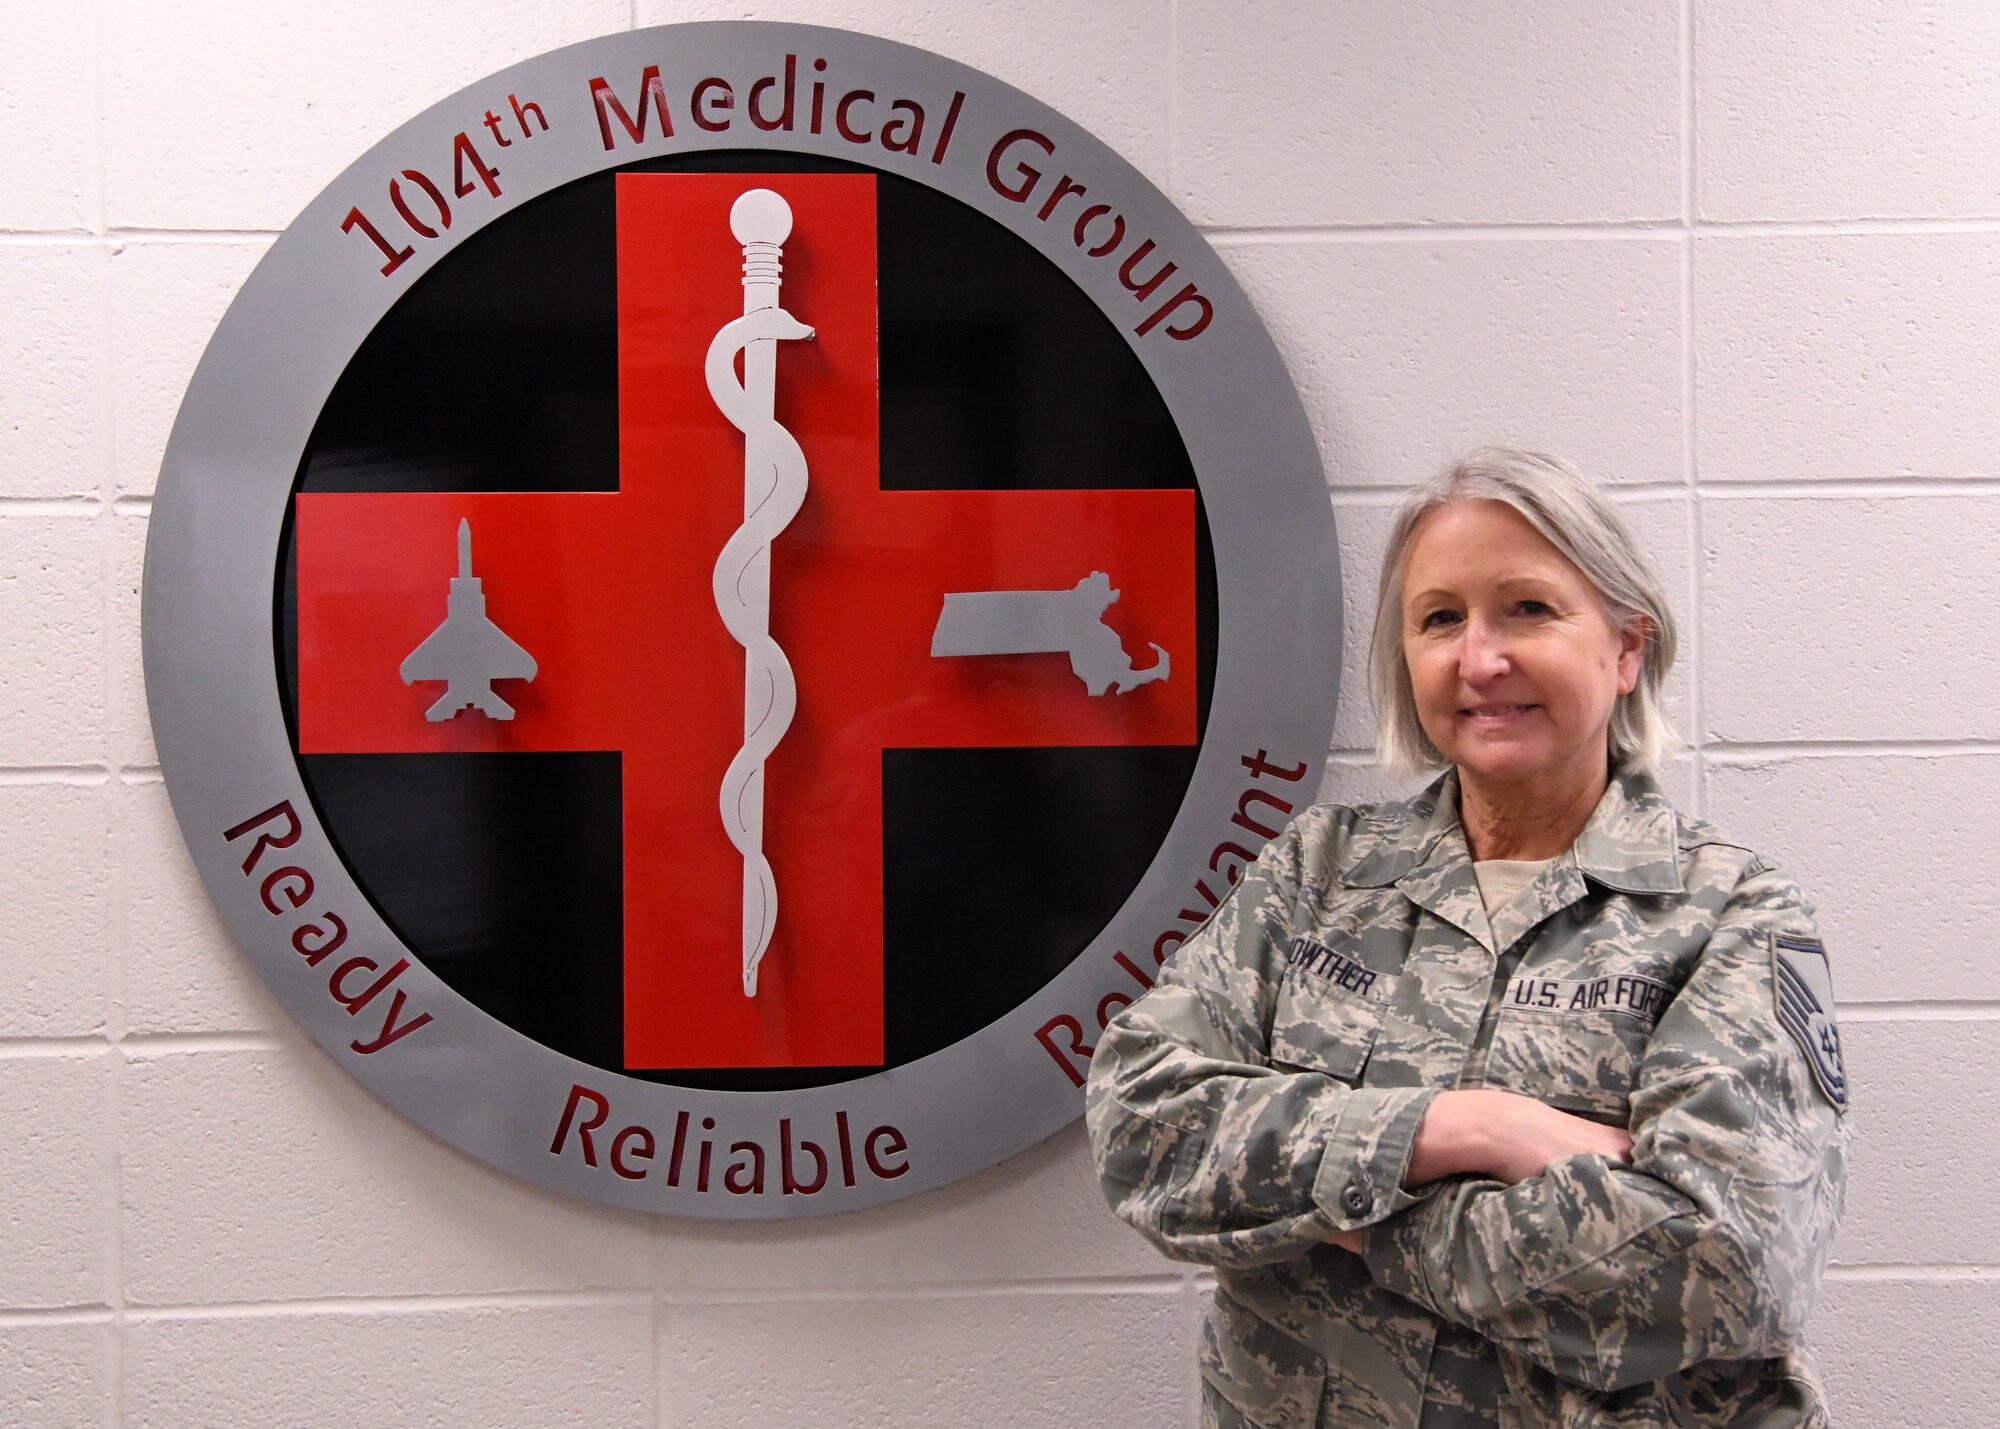 U.S. Air Force Master Sgt. Terrylee Lois Crowther, a dental technician assigned to the 104th Fighter Wing, Massachusetts Air National Guard, poses for a photo in front of the 104th Medical Group crest at Barnes Air National Guard Base, Mass., Feb. 2, 2020. Crowther is the NCOIC of dental at the 104th FW and is nearing her retirement after 40 years of military service. (U.S. Air National Guard photo by Airman Camille Lienau)